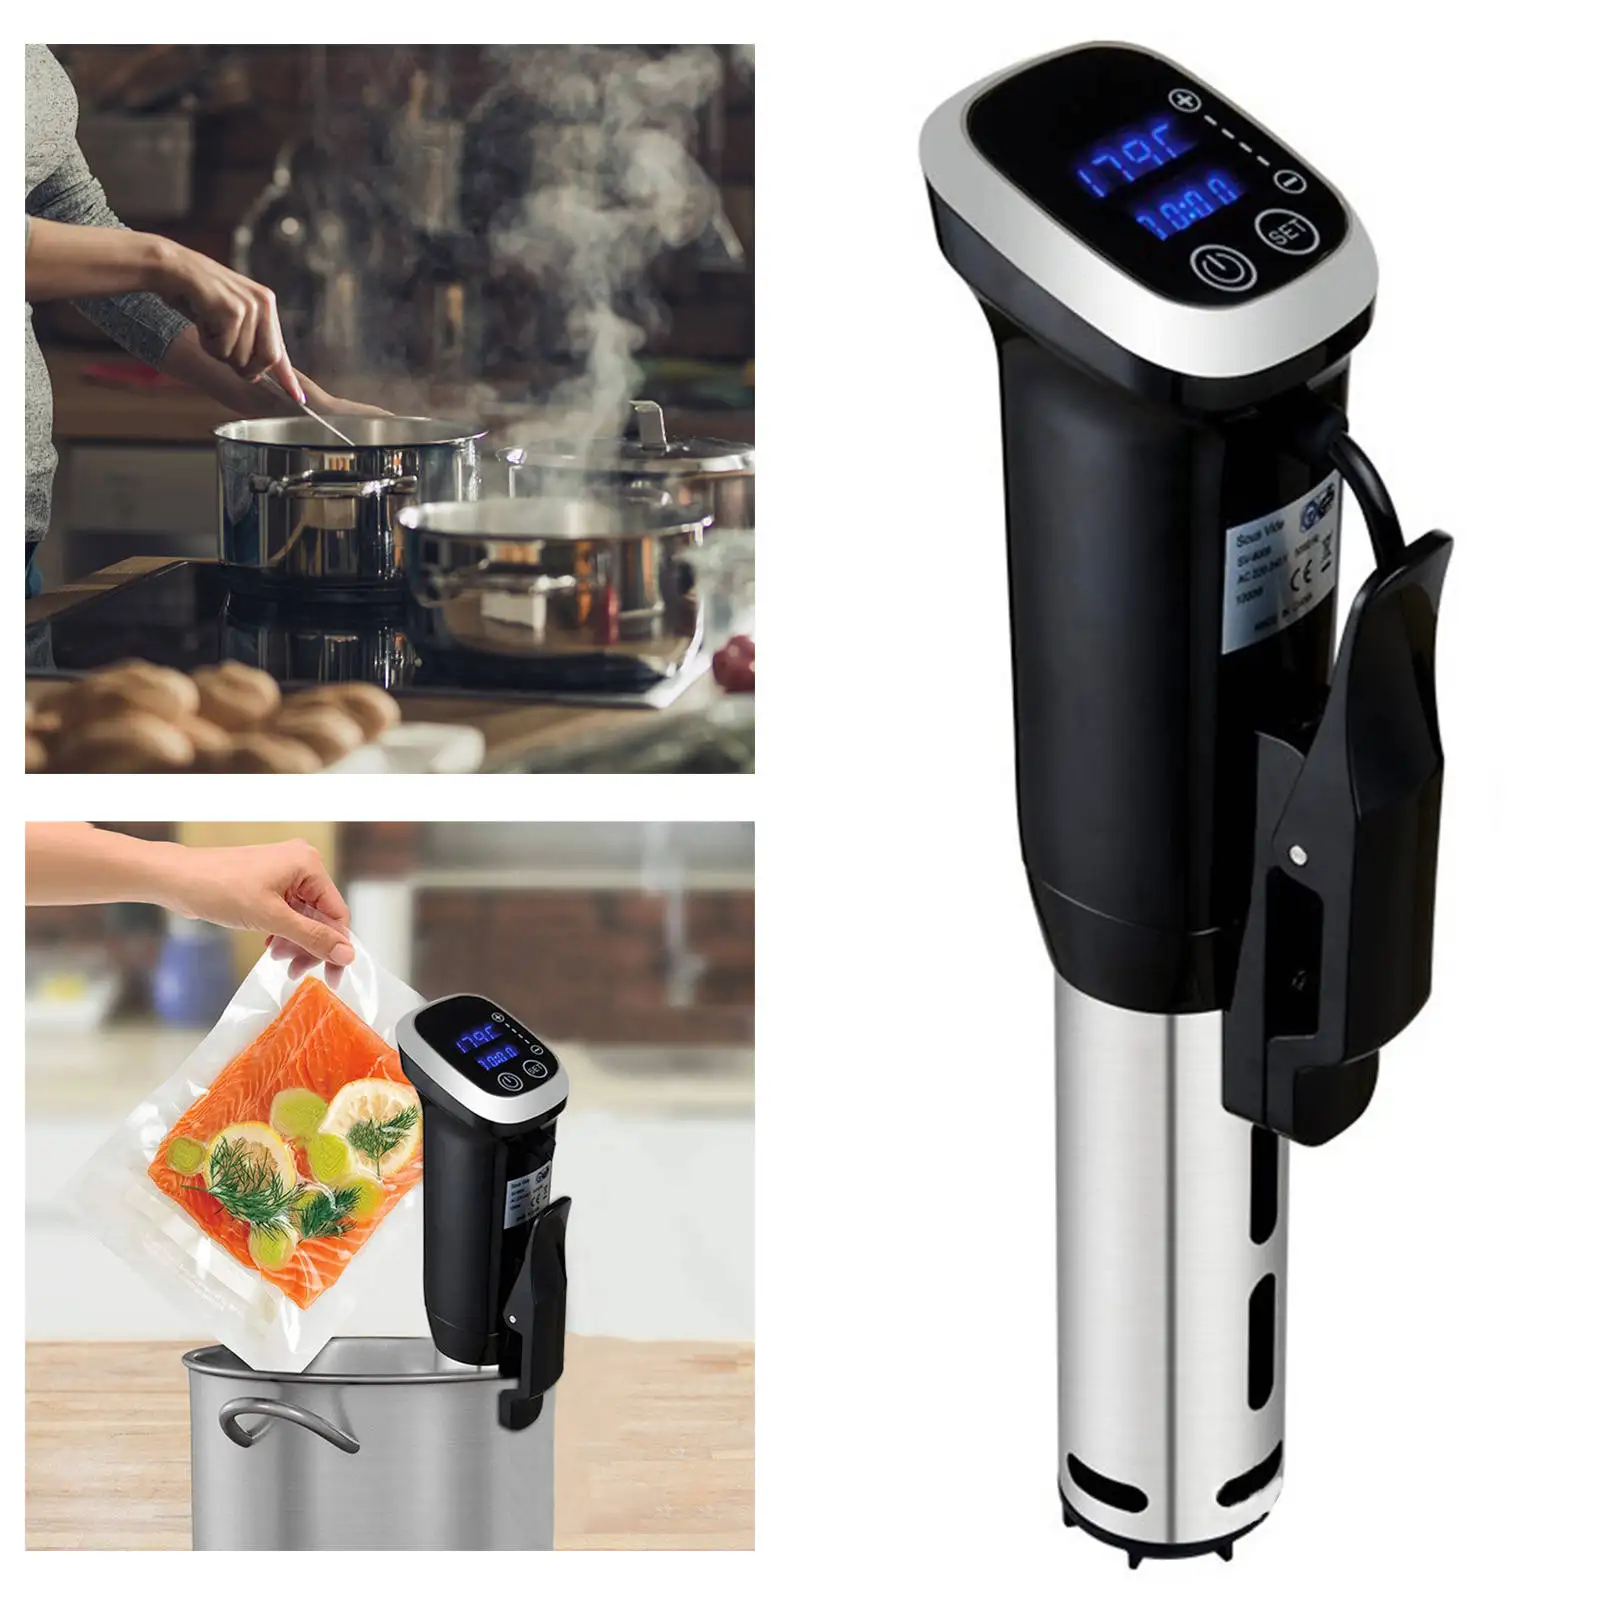 Sous Vide Cooker Quiet Operation Immersion Circulator Accurate Temperature Sturdy LED Digital Display Thermal 1200 W for Kitchen